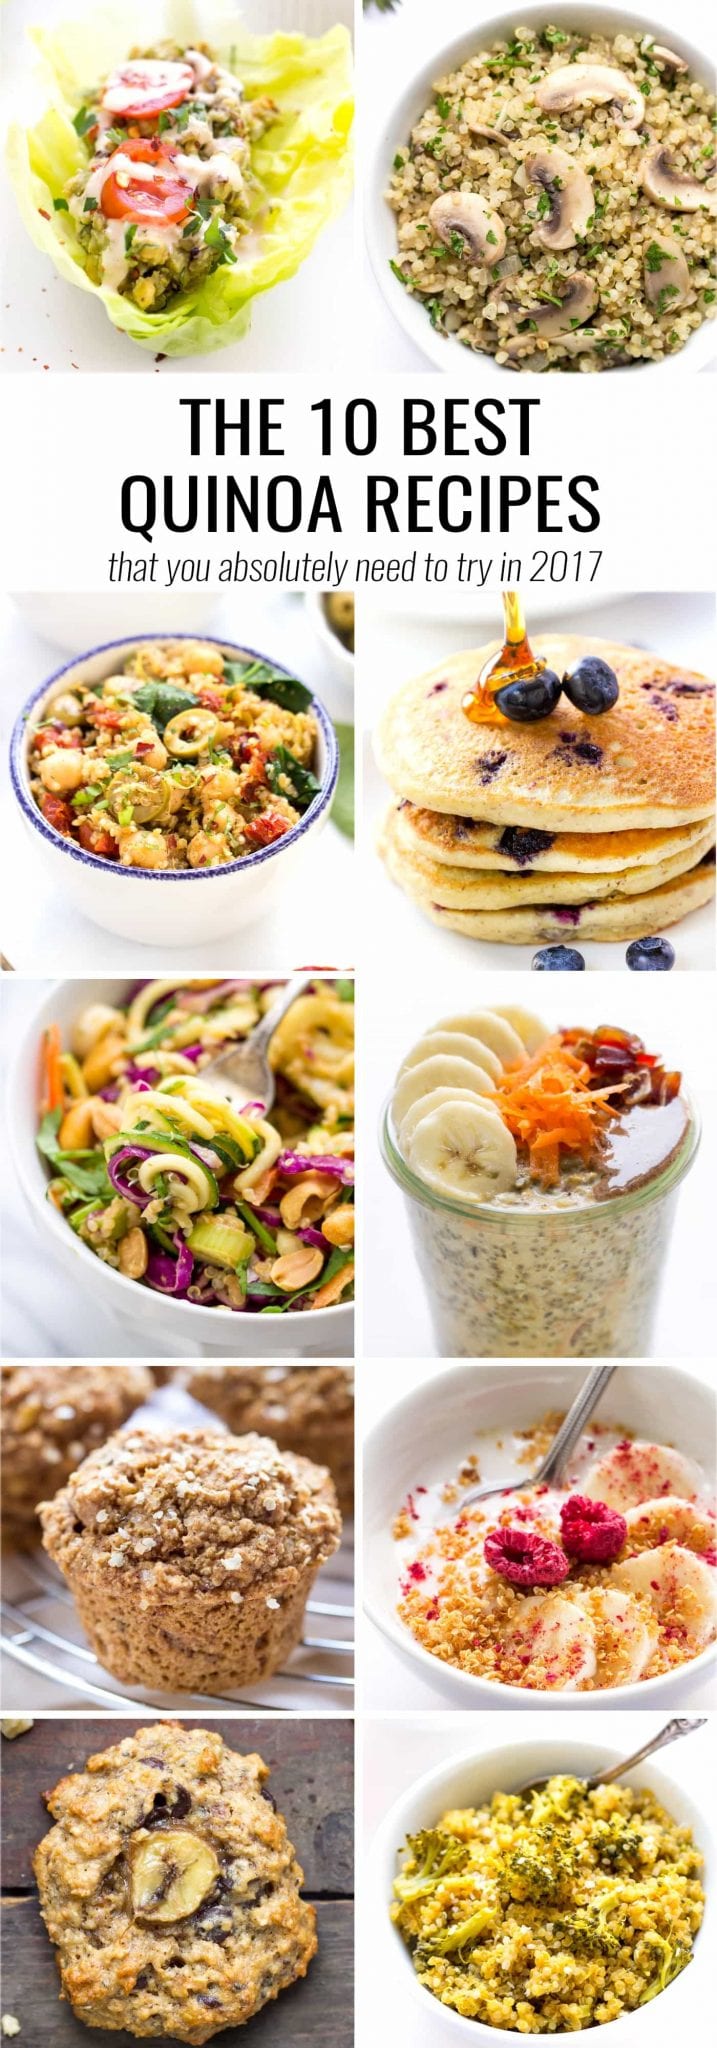 These are the absolute 10 BEST quinoa recipes that you need to try this year!